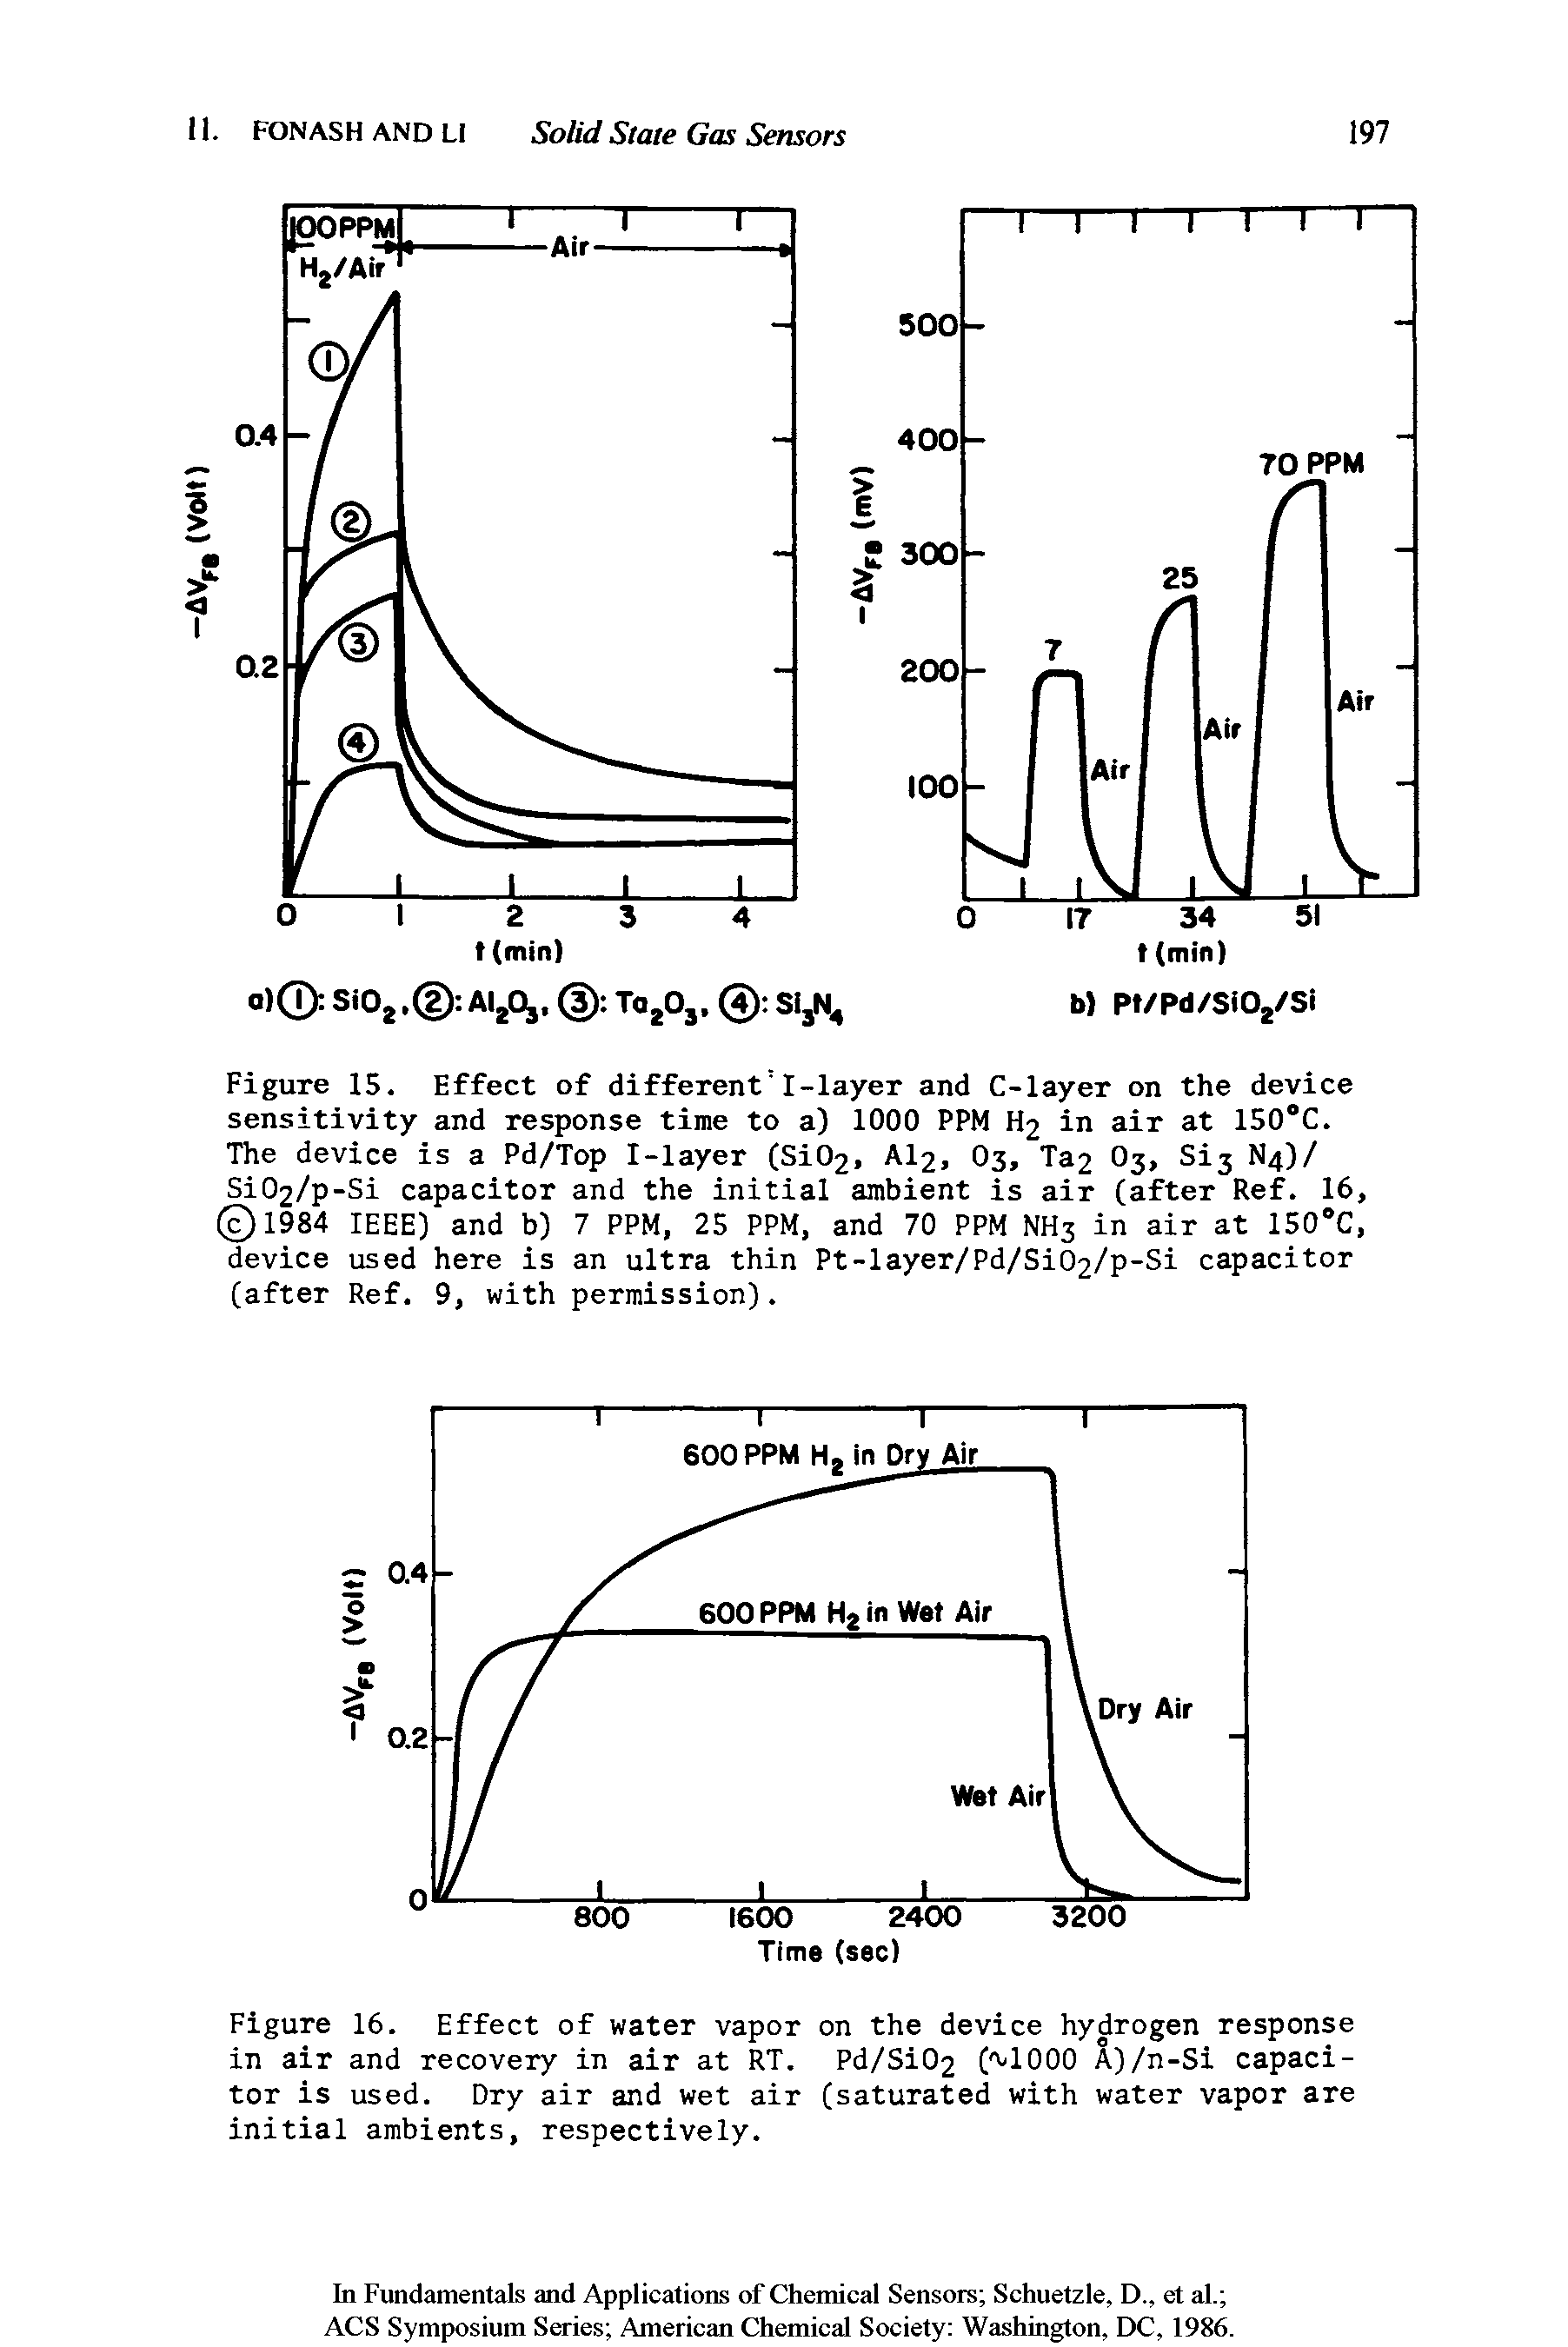 Figure 15. Effect of different I-layer and C-layer on the device sensitivity and response time to a) 1000 PPM H2 in air at 150°C. The device is a Pd/Top I-layer (Si02. AI2, O3, Ta2 O3, Si3 N4)/ Si02/p-Si capacitor and the initial ambient is air (after Ref. 16, 1984 IEEE) and b) 7 PPM, 25 PPM, and 70 PPM NH3 in air at 150 C, device used here is an ultra thin Pt-layer/Pd/Si02/p-Si capacitor (after Ref. 9, with permission).